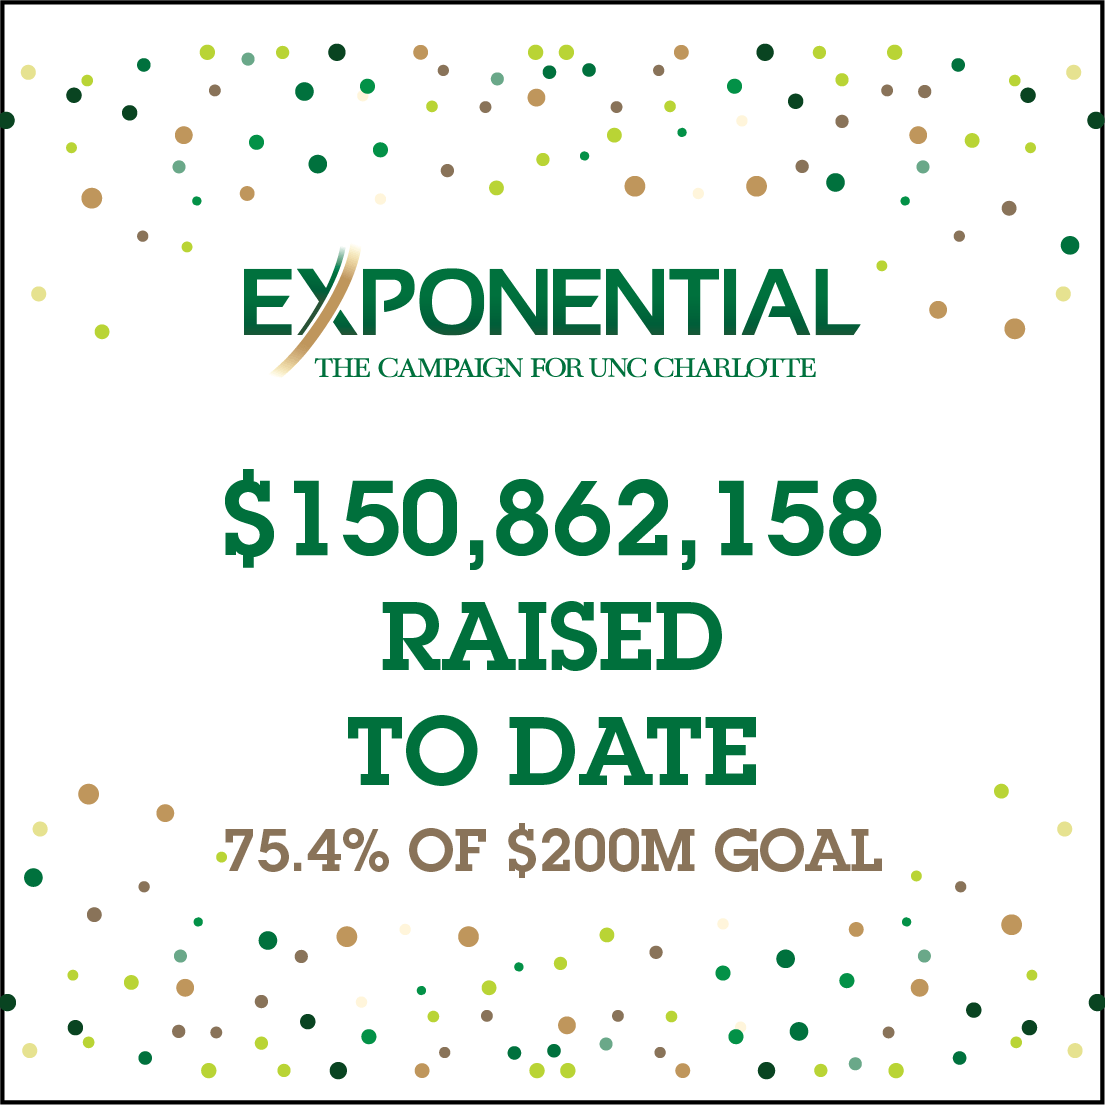 Exponential: $150,862,158 raised to date